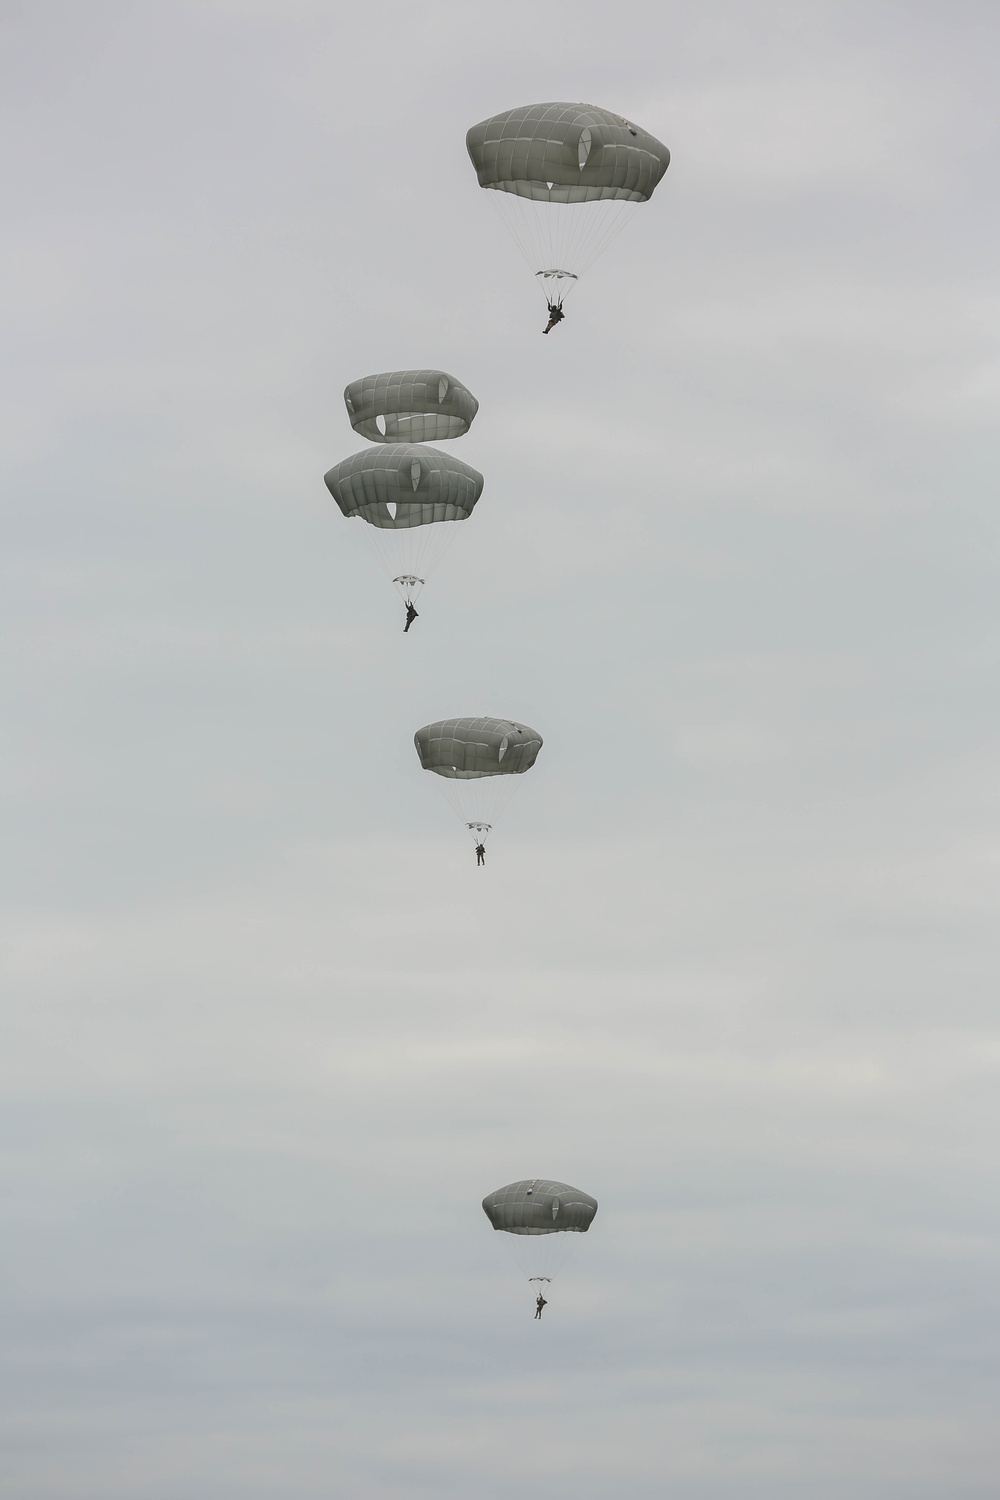 US, Ukrainian and Polish paratroopers jump from C-130